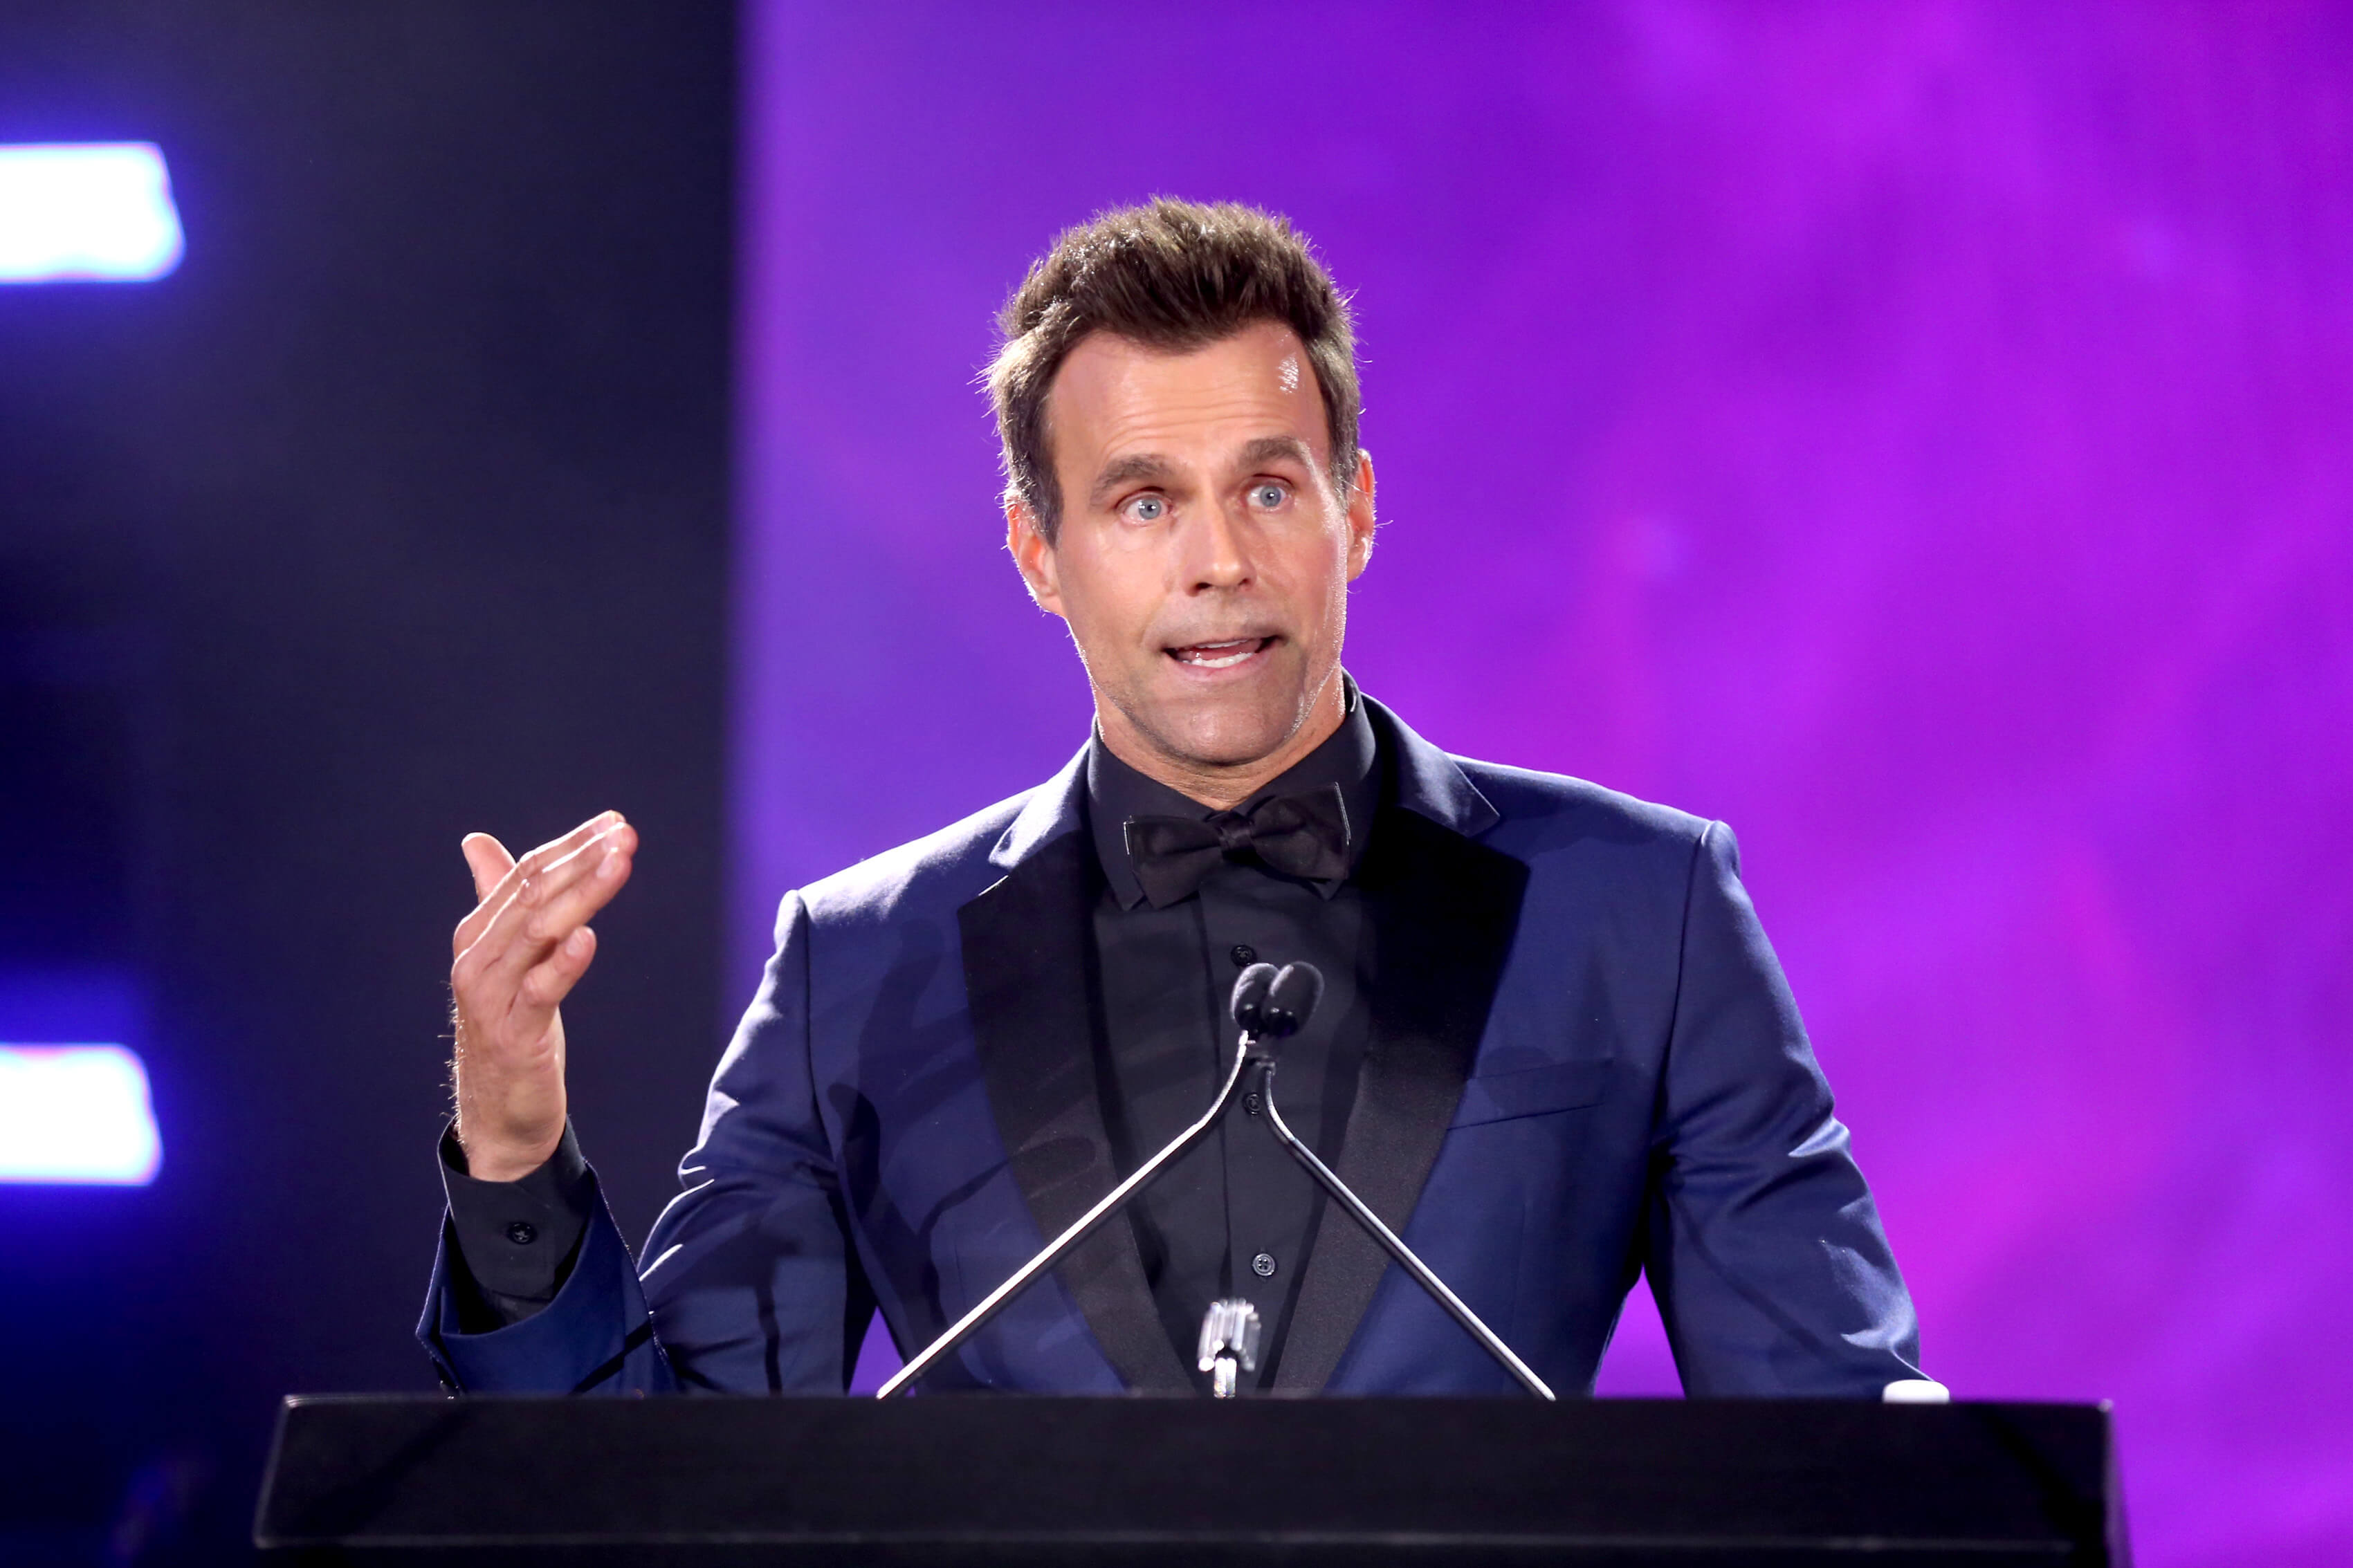 'General Hospital' star Cameron Mathison in a blue and black suit; speaking into a microphone podium.